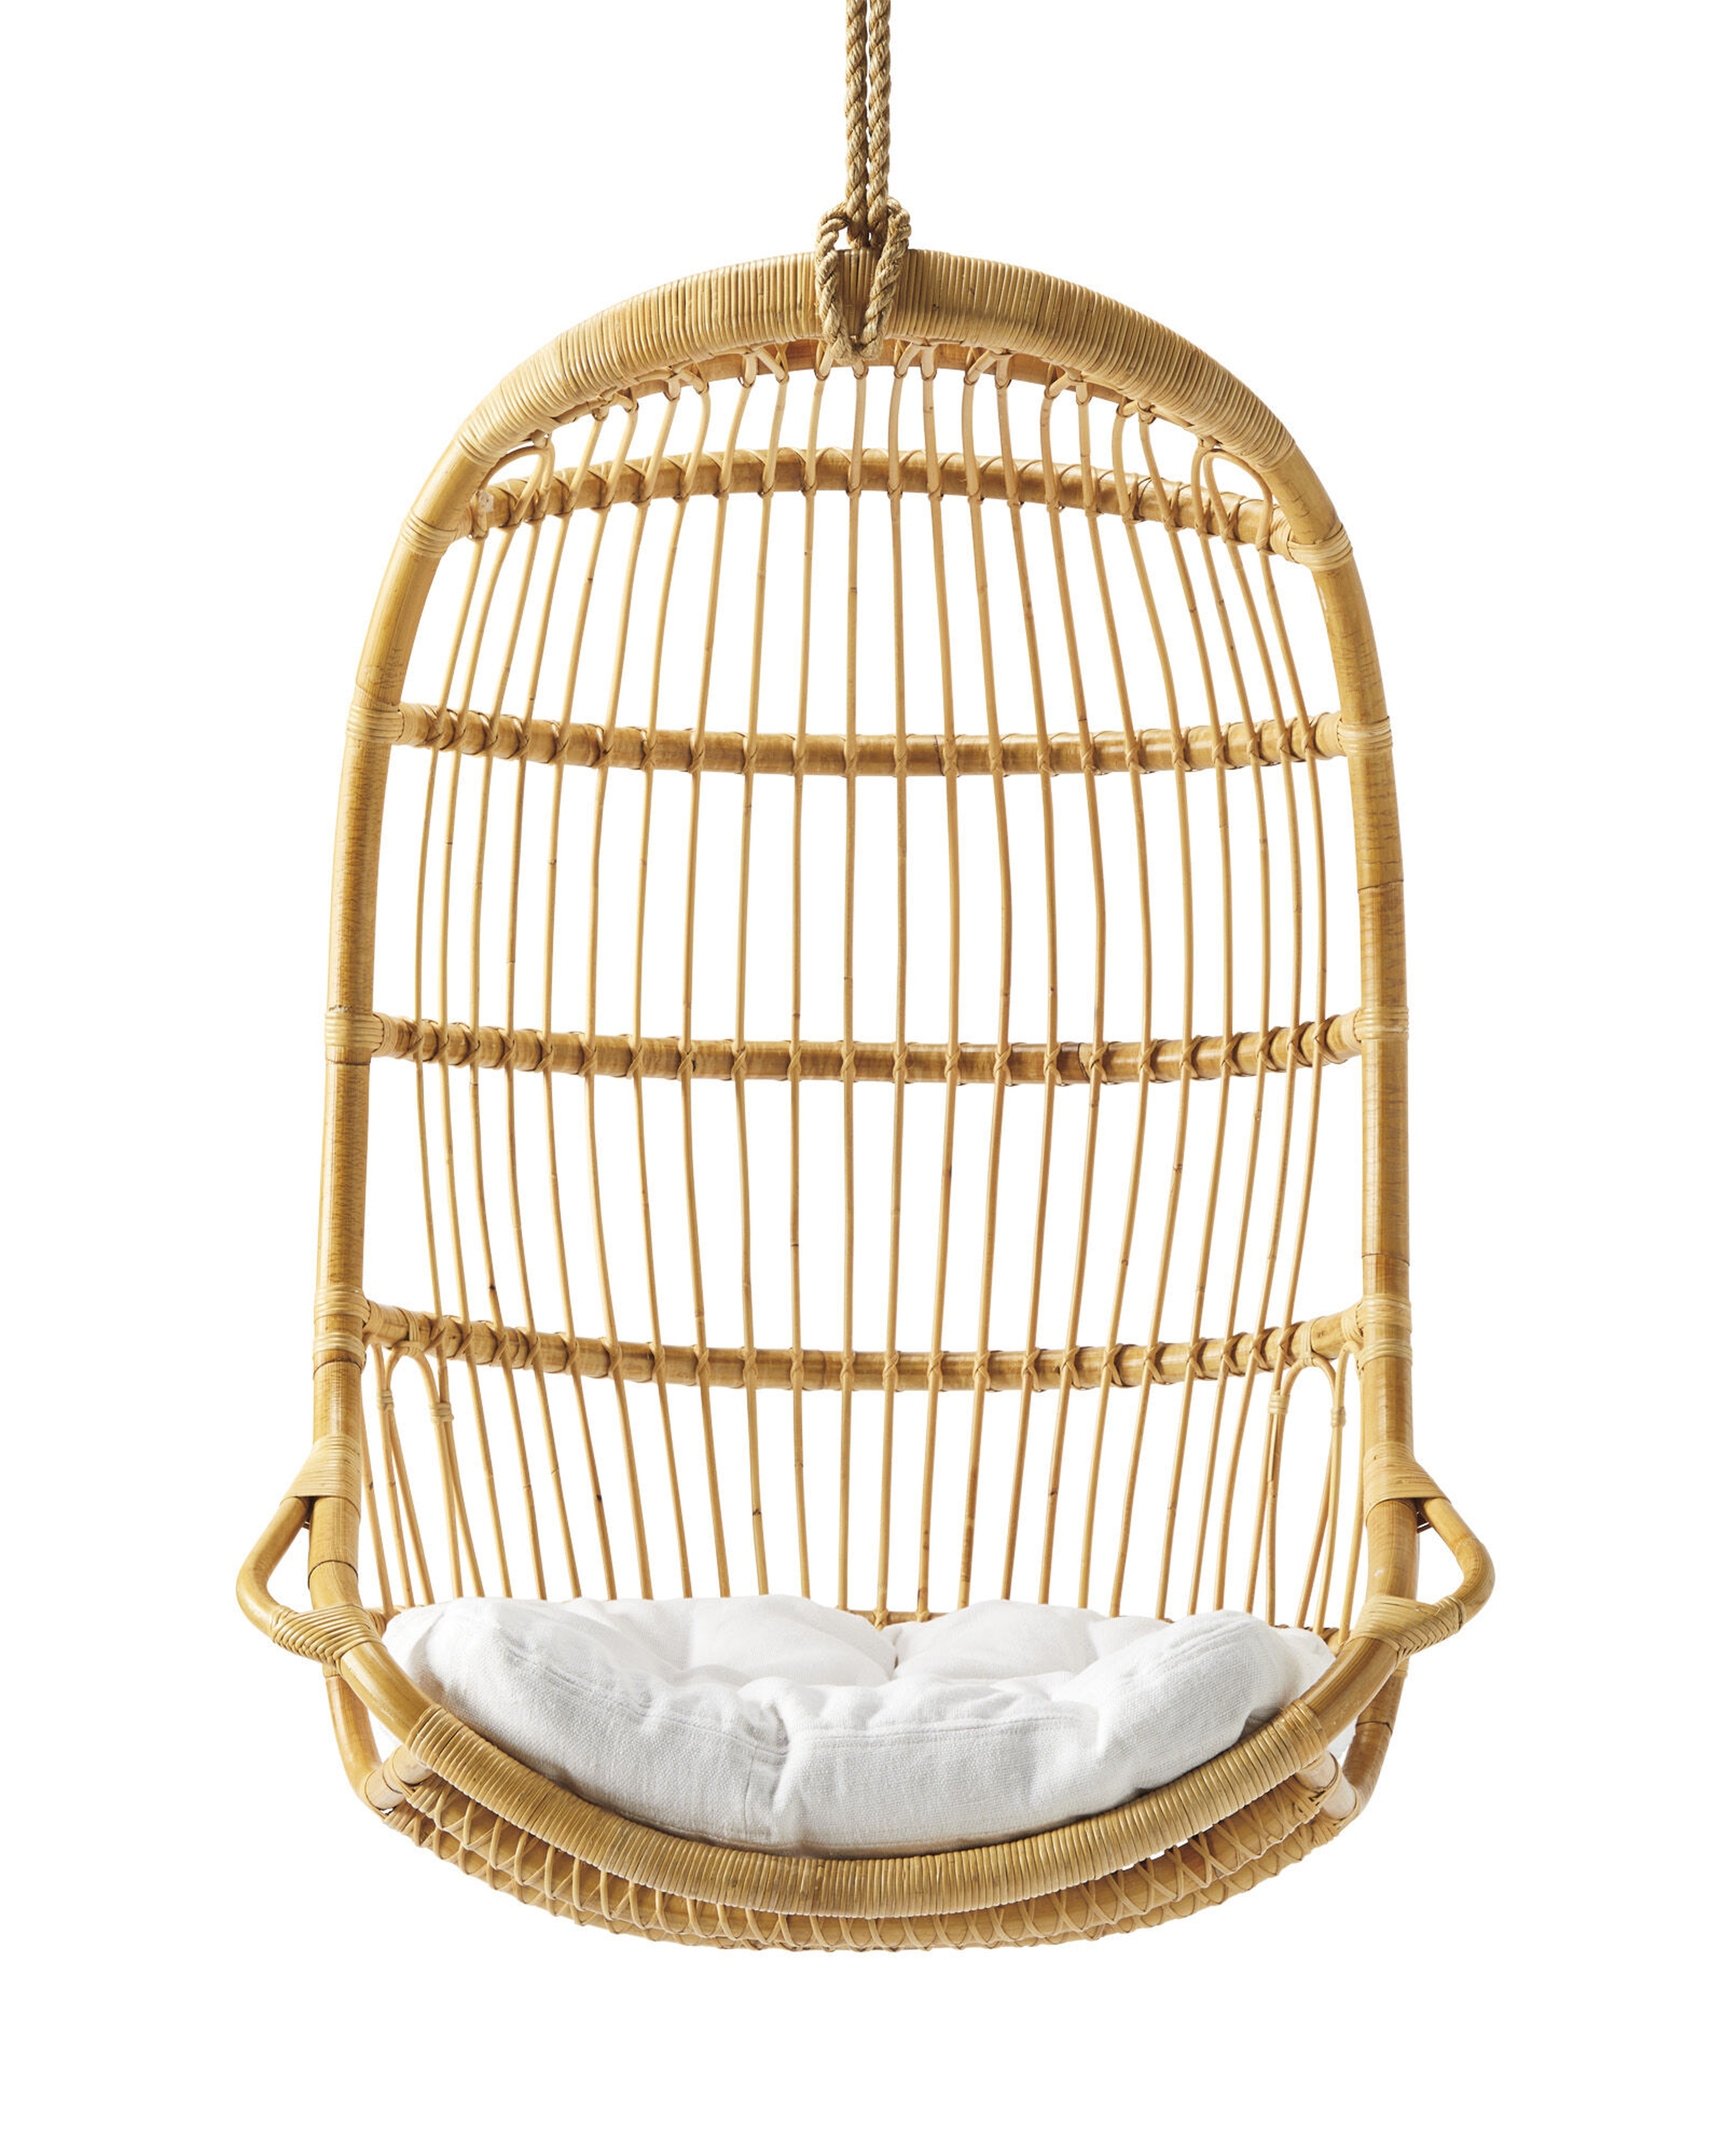 Hanging Rattan Chair Cushion - Serena and Lily